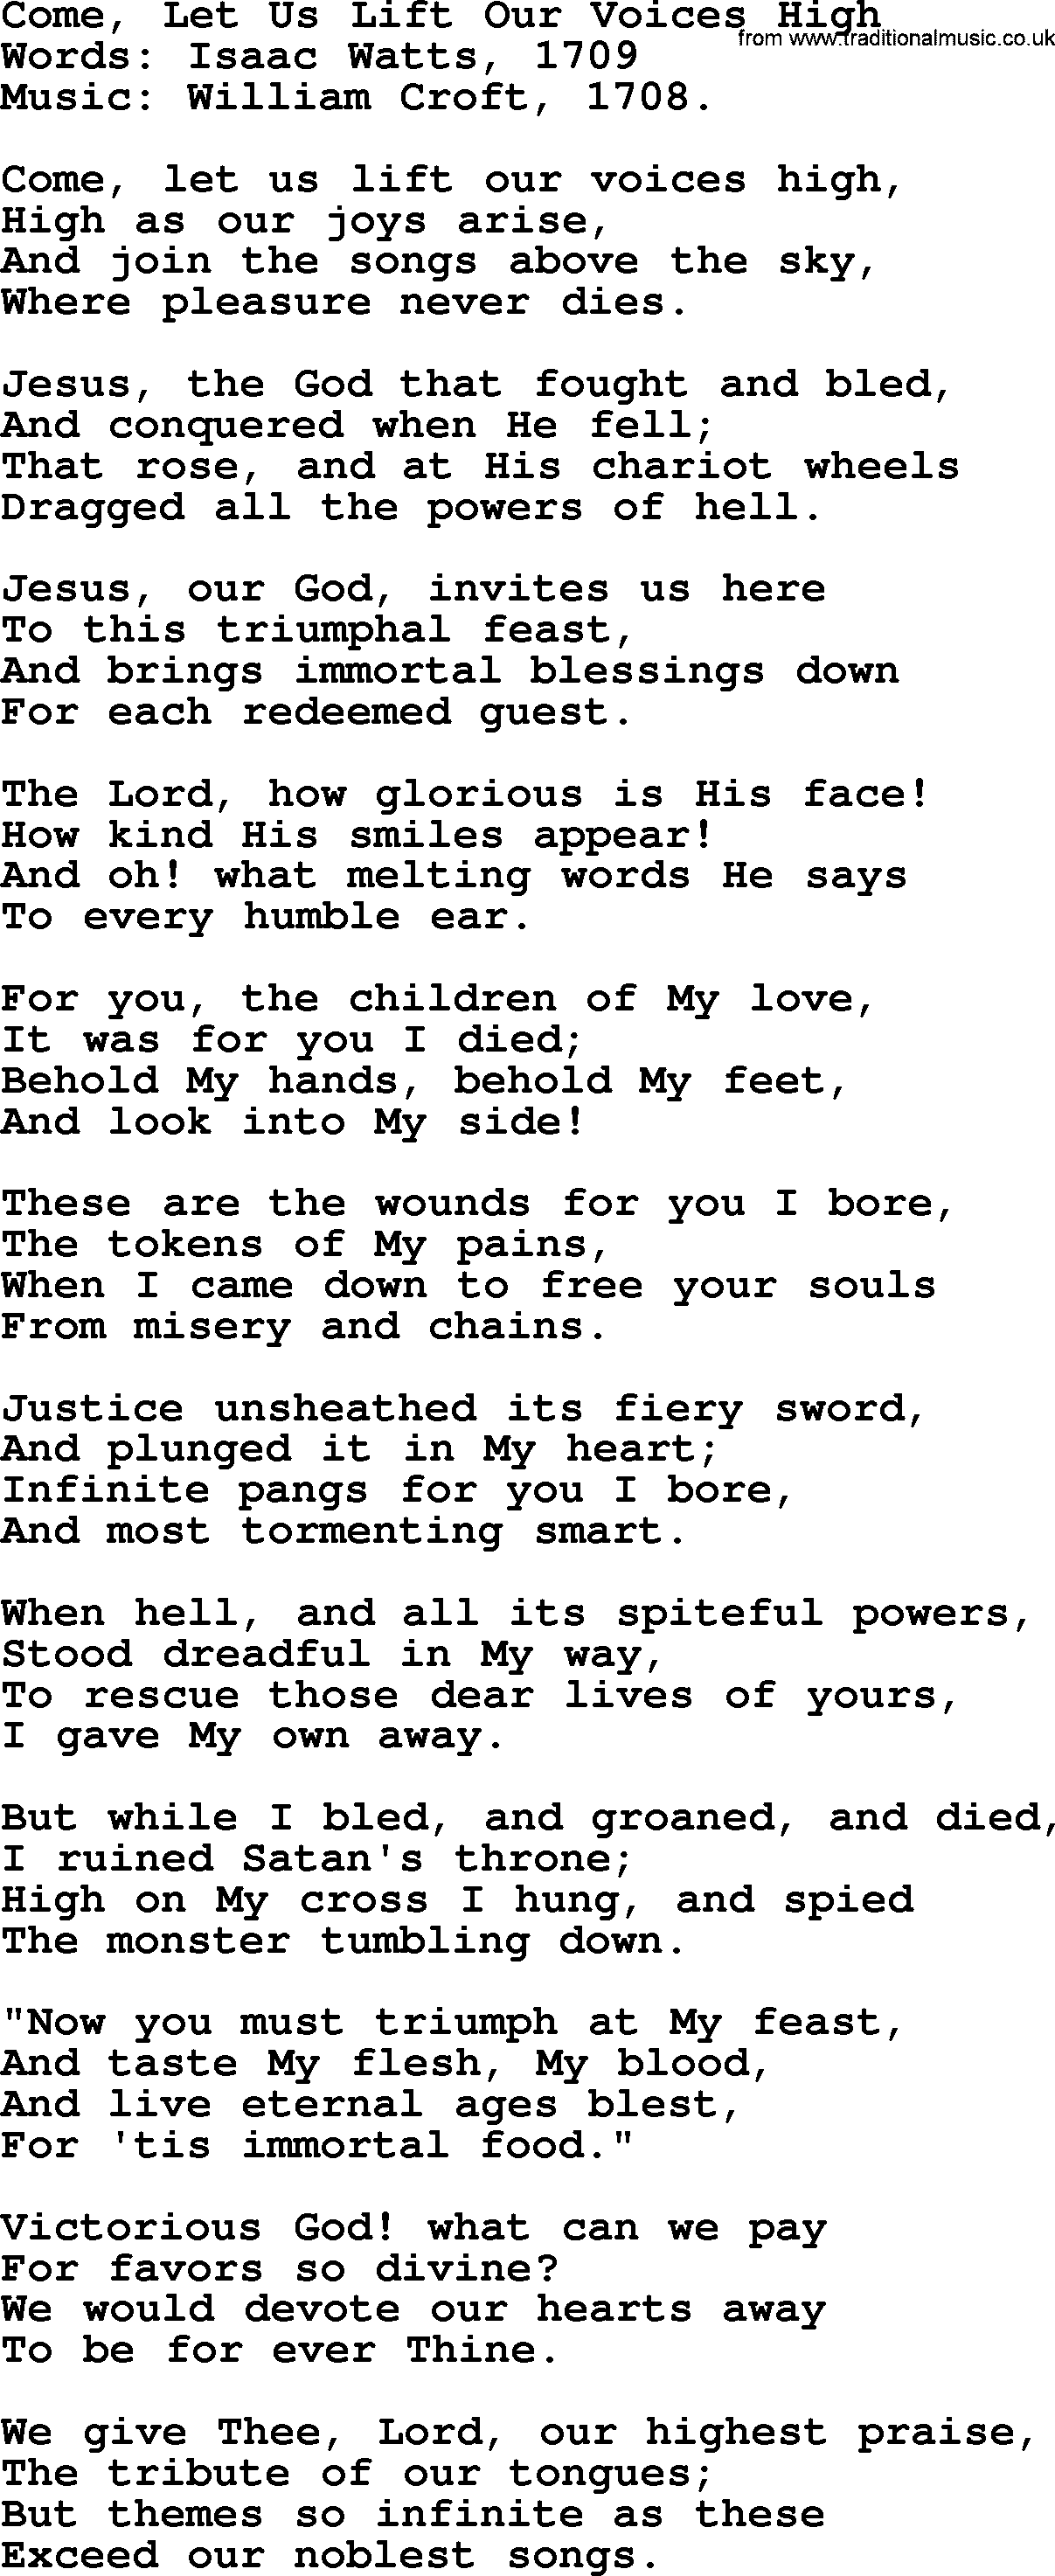 Christian hymns and song lyrics for Communion(The Eucharist): Come, Let Us Lift Our Voices High, lyrics with PDF